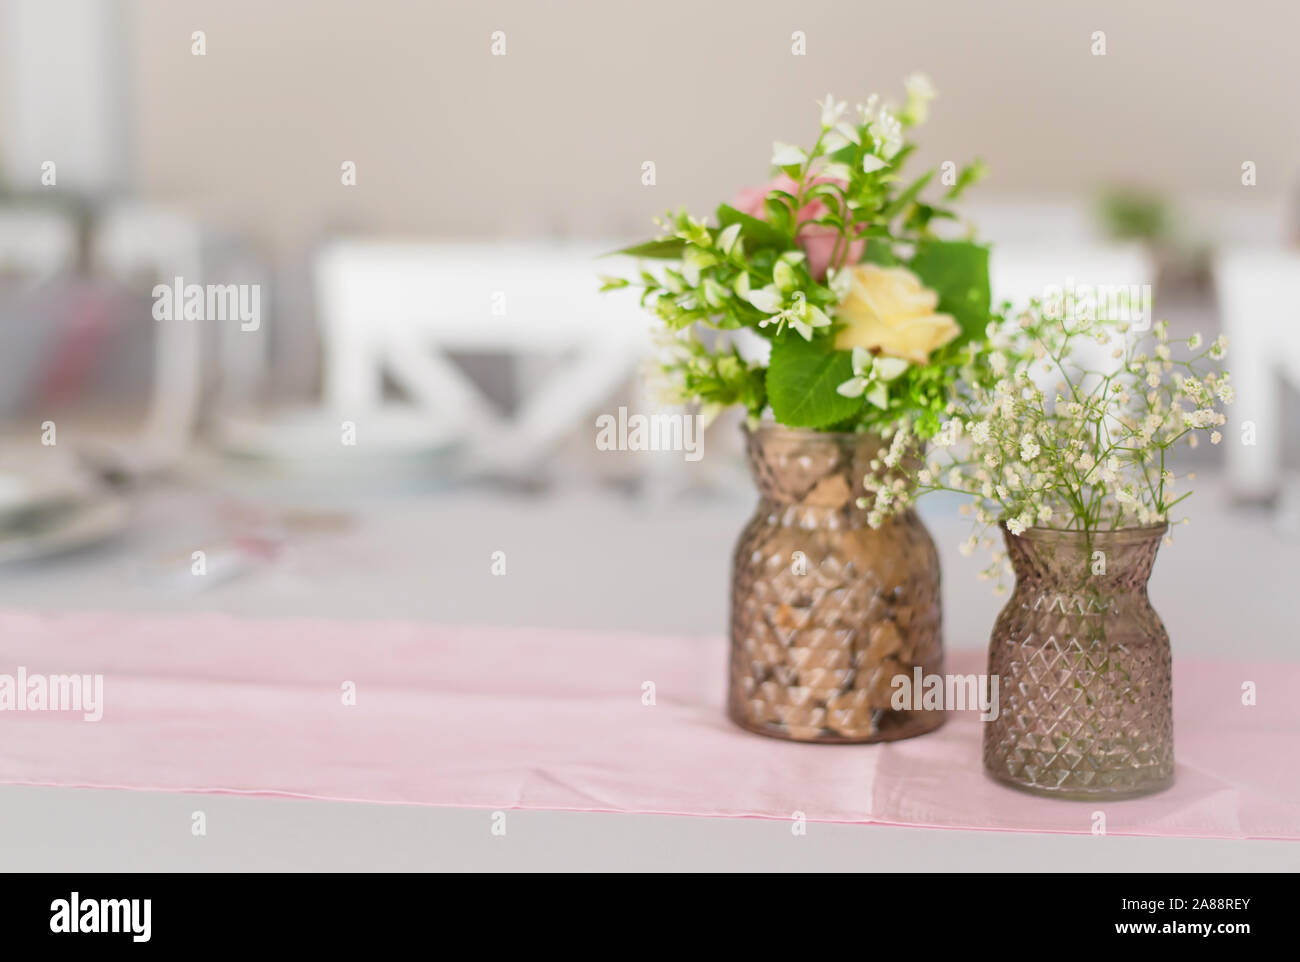 Wedding decoration on the table Stock Photo